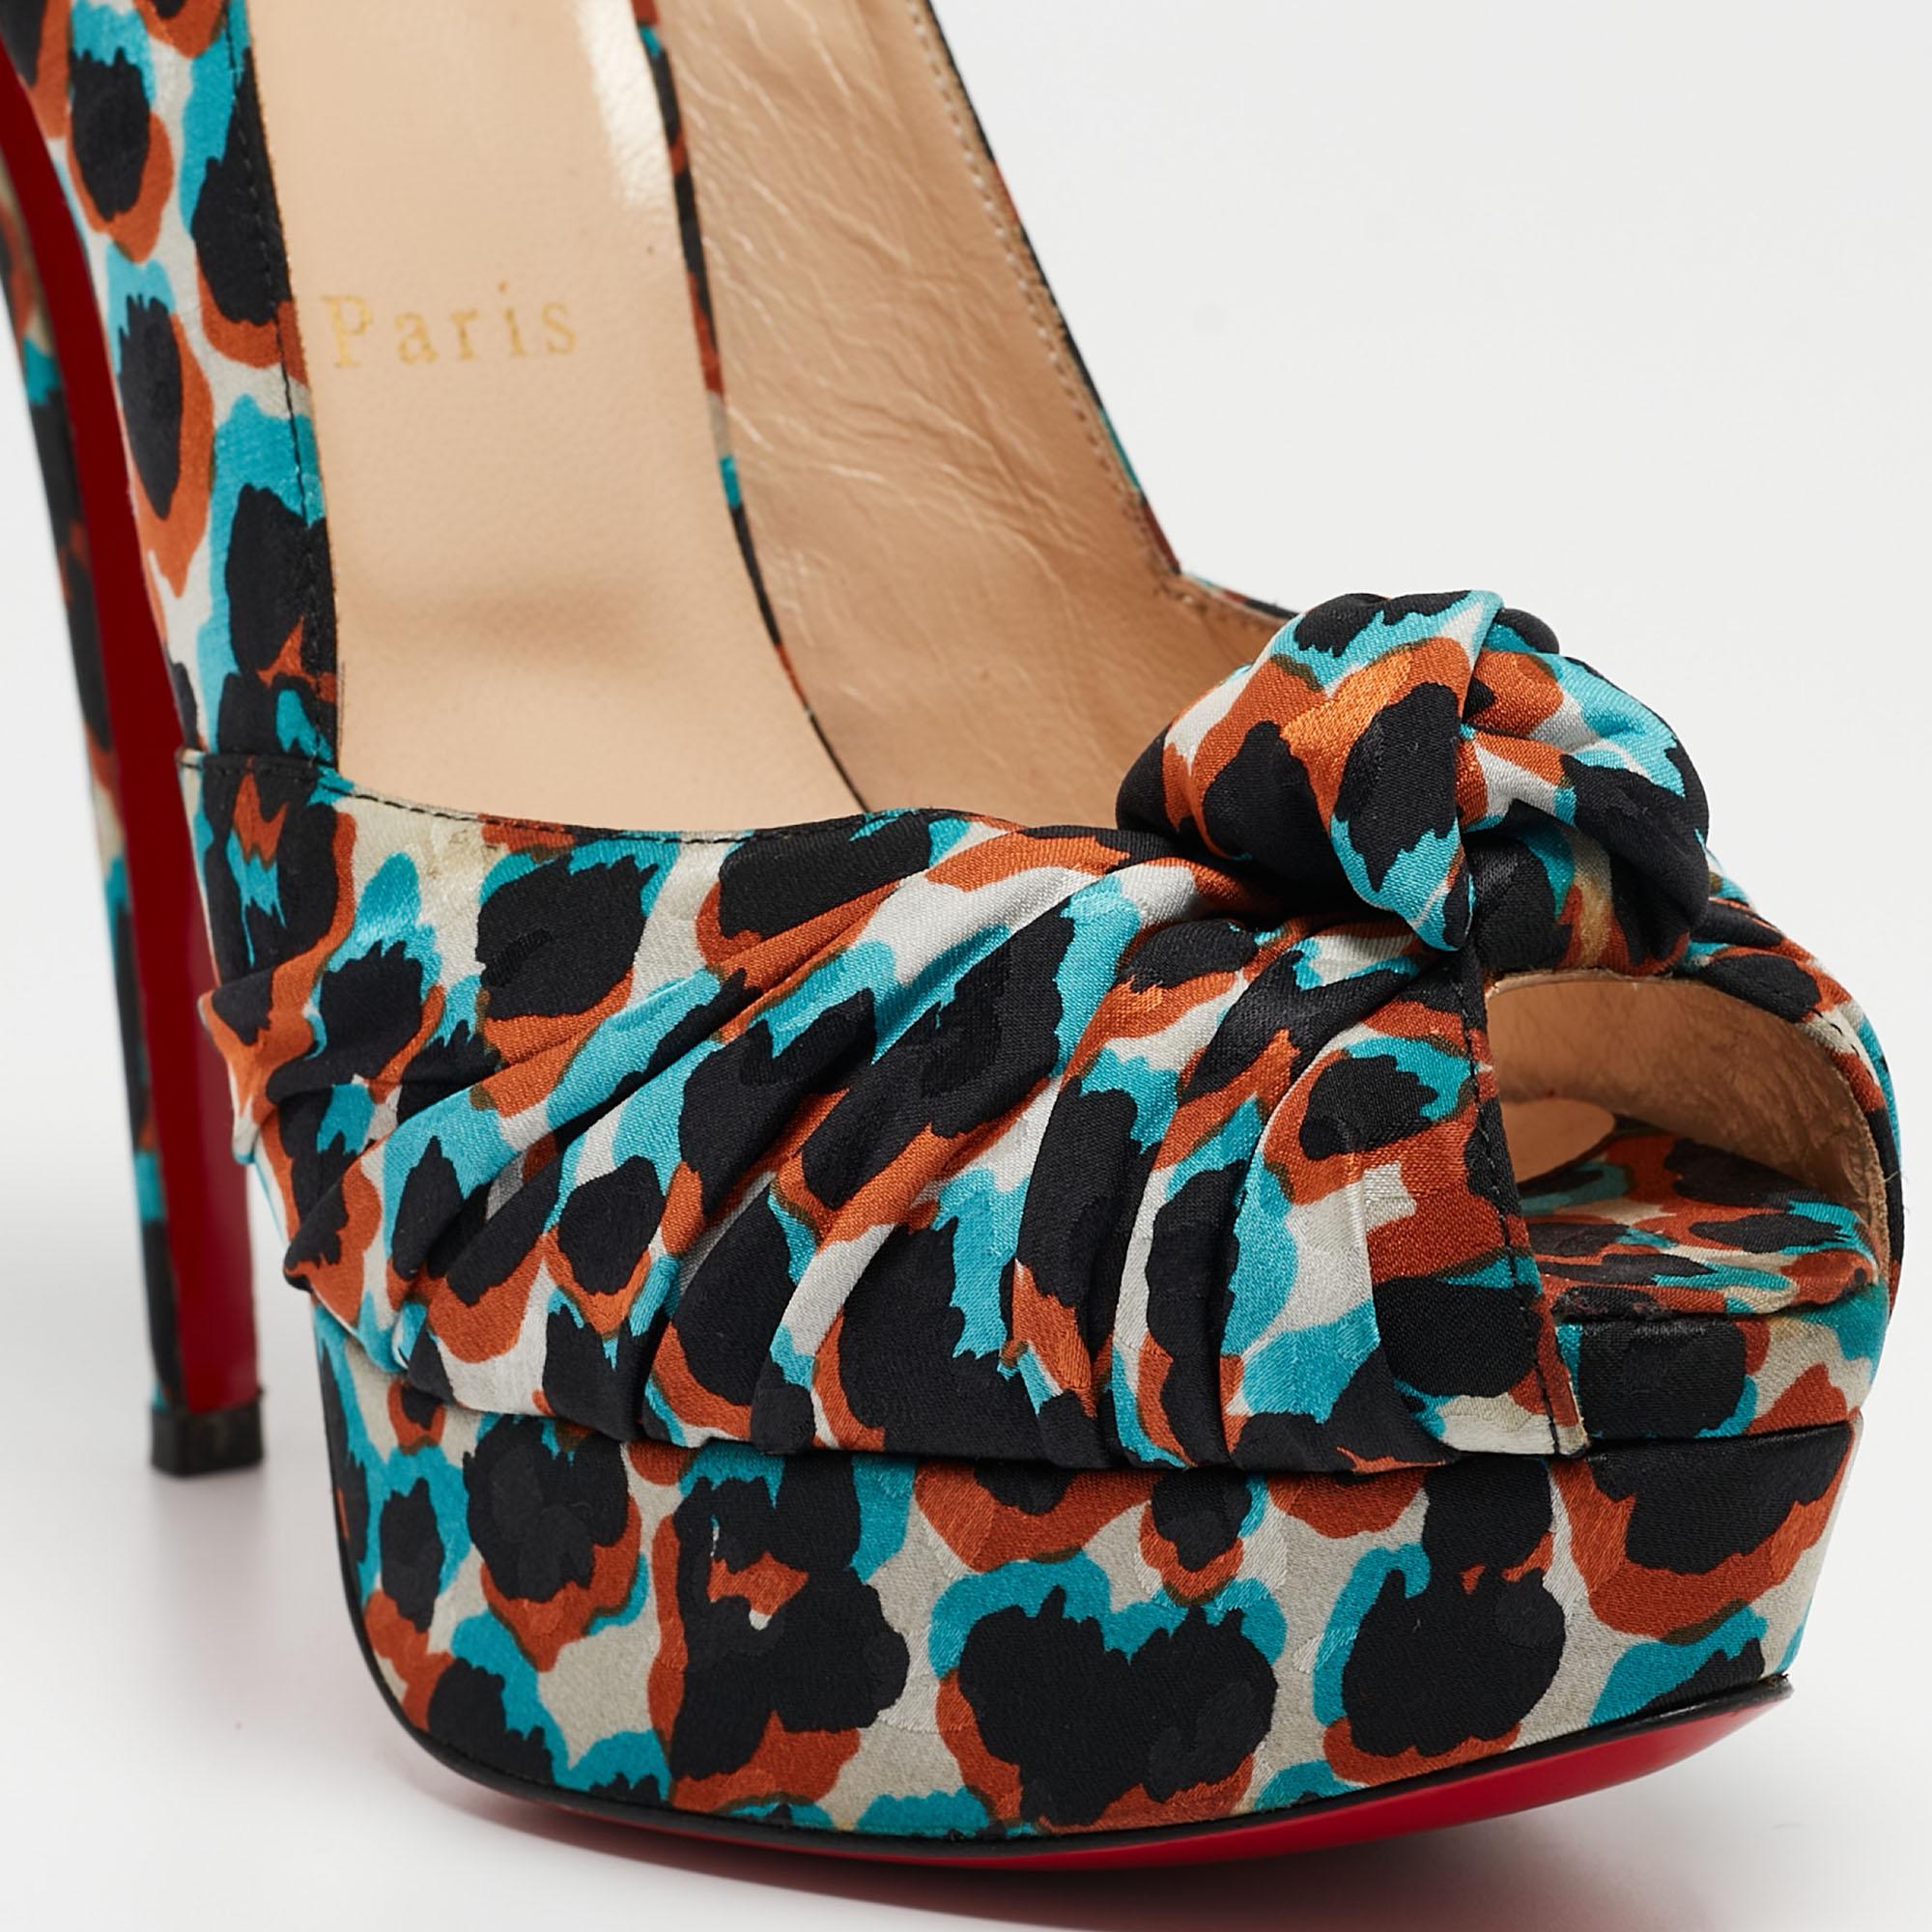 Christian Louboutin Tricolor Printed Fabric Jenny Slingback Pumps Size 39.5 For Sale 3